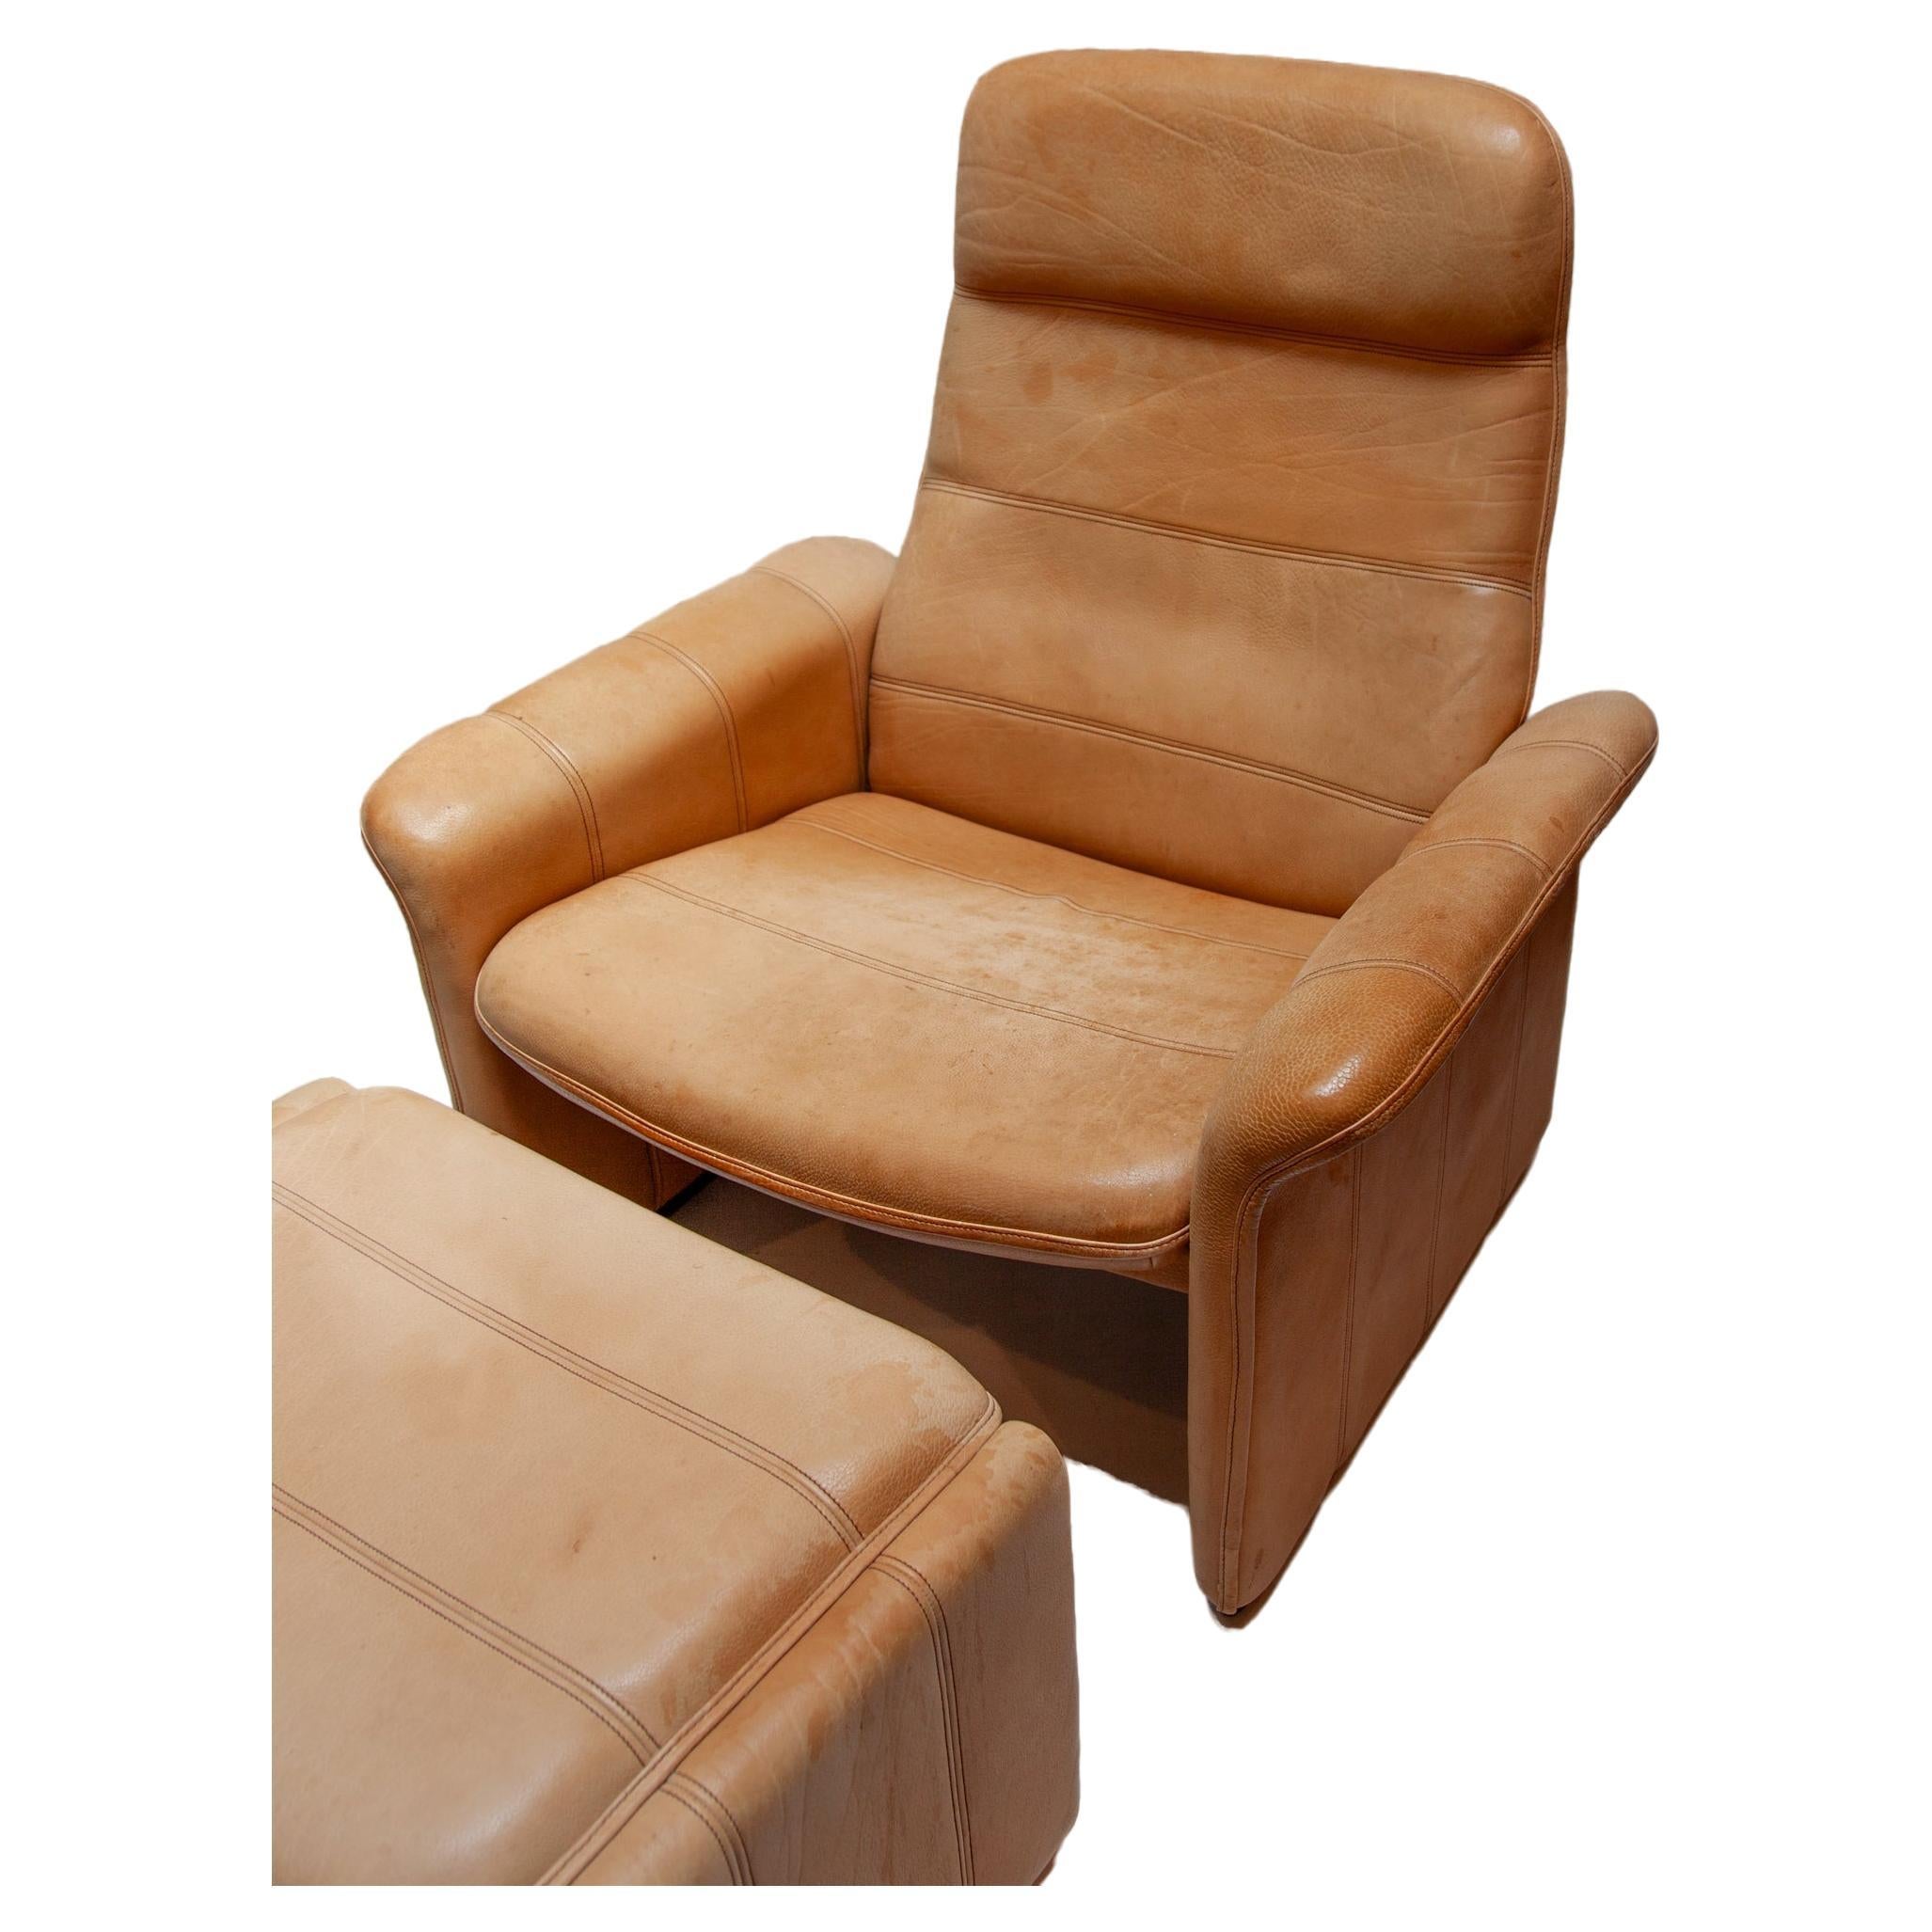 De Sede DS 50 leather comfortable reclining armchair and foot-stool, pouf, Switzerland 1970s. Built to incredibly high standards by de Sede craftsman in Switzerland, this original DS 50 reclining lounge armchair is upholstered in stunning camel